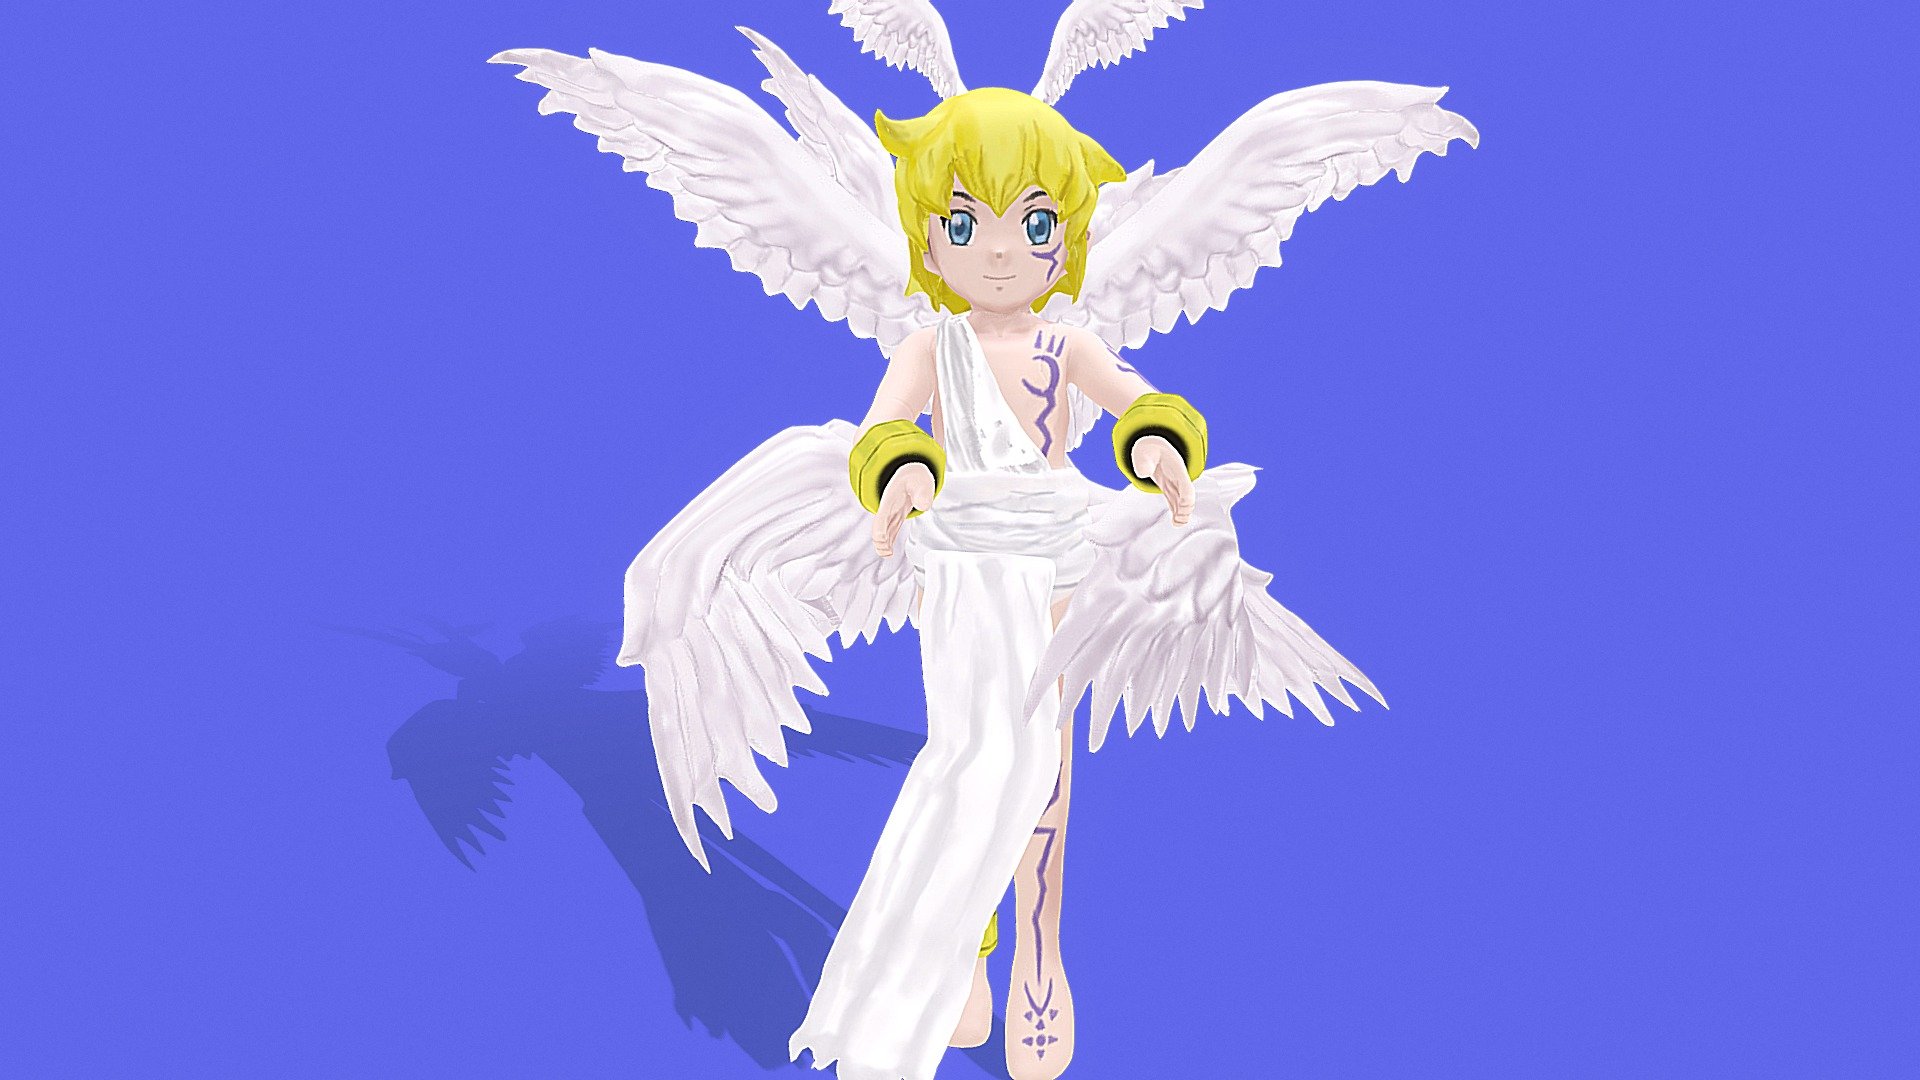 Lucemon Gets New Update in Digimon Masters